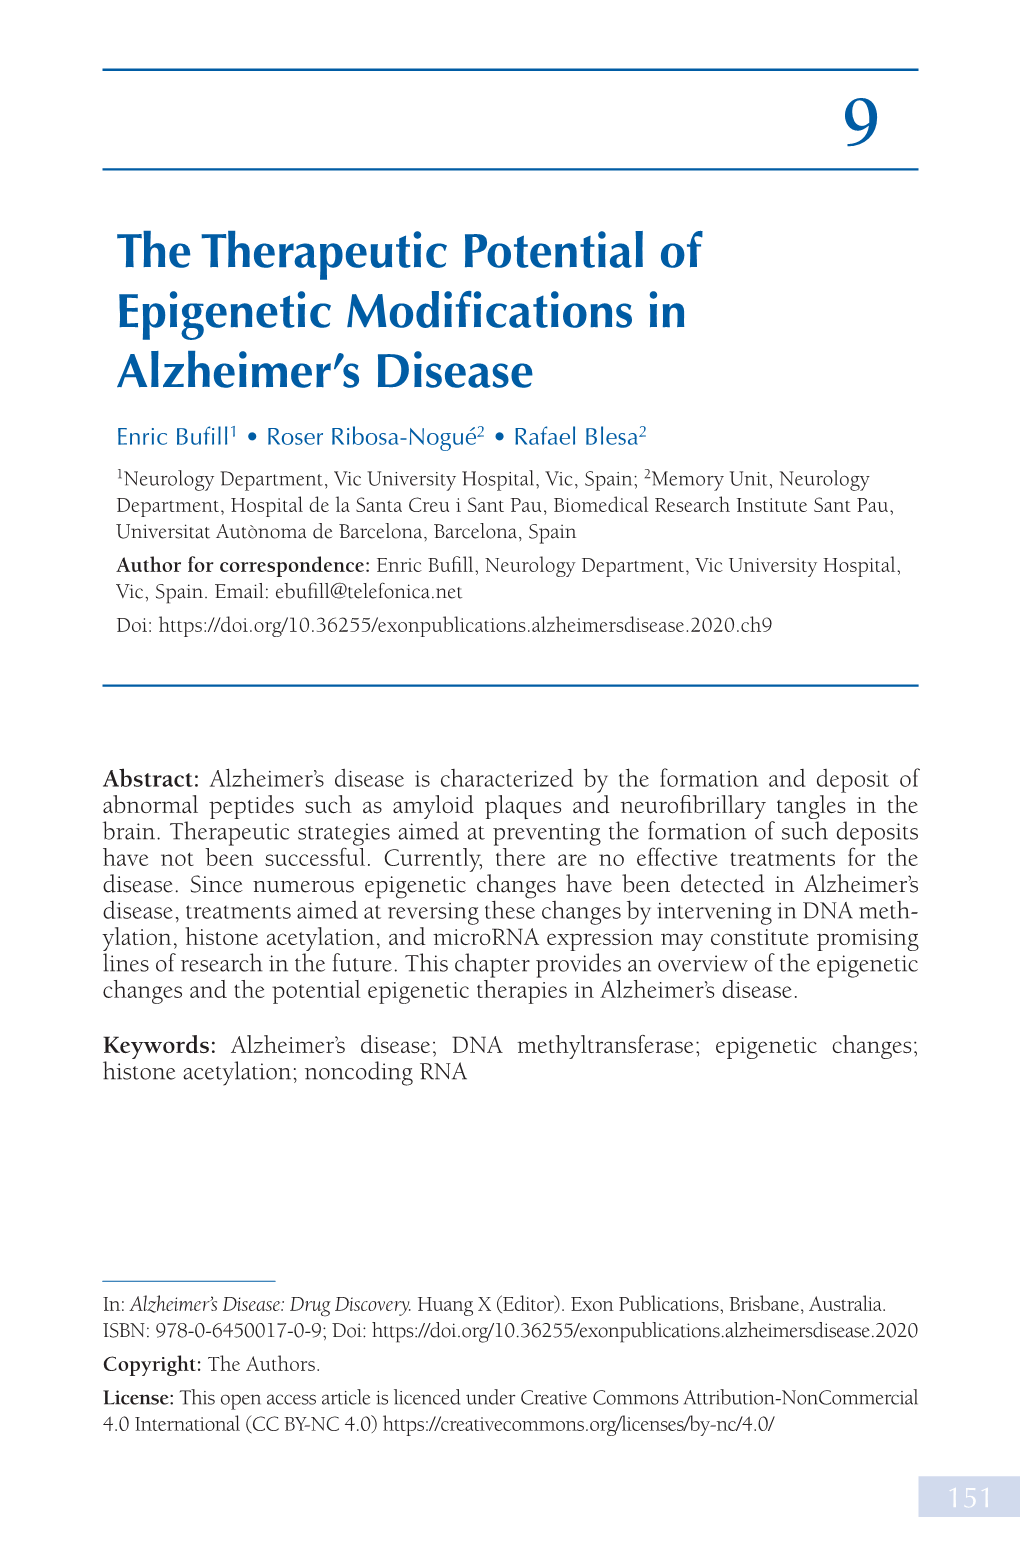 The Therapeutic Potential of Epigenetic Modifications in Alzheimer’S Disease